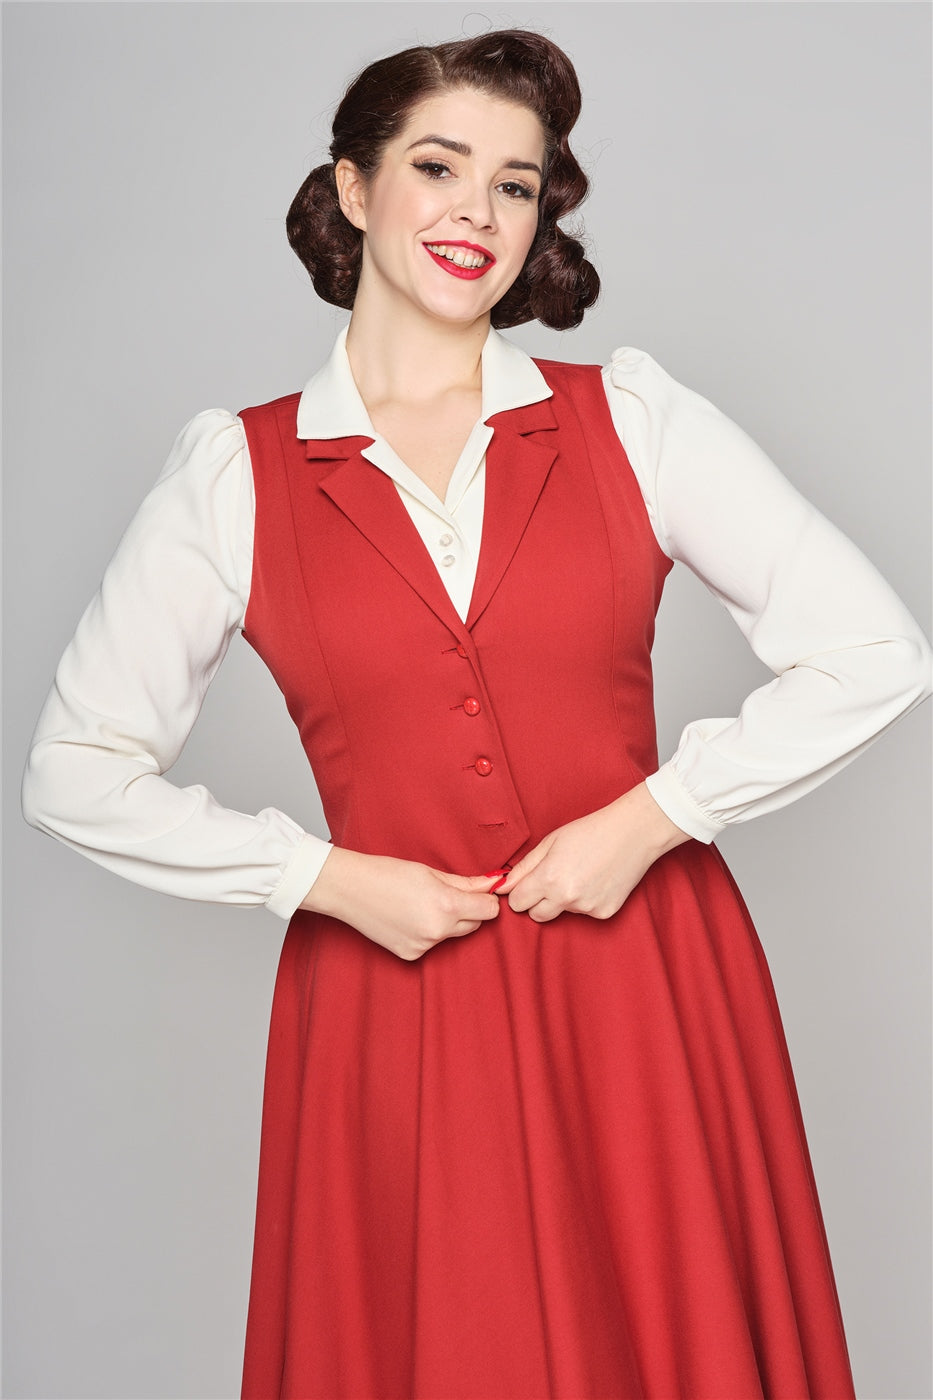 Retro style woman wearing her hair in a 50s style up-do with a long sleeved cream blouse and a red swing skirt